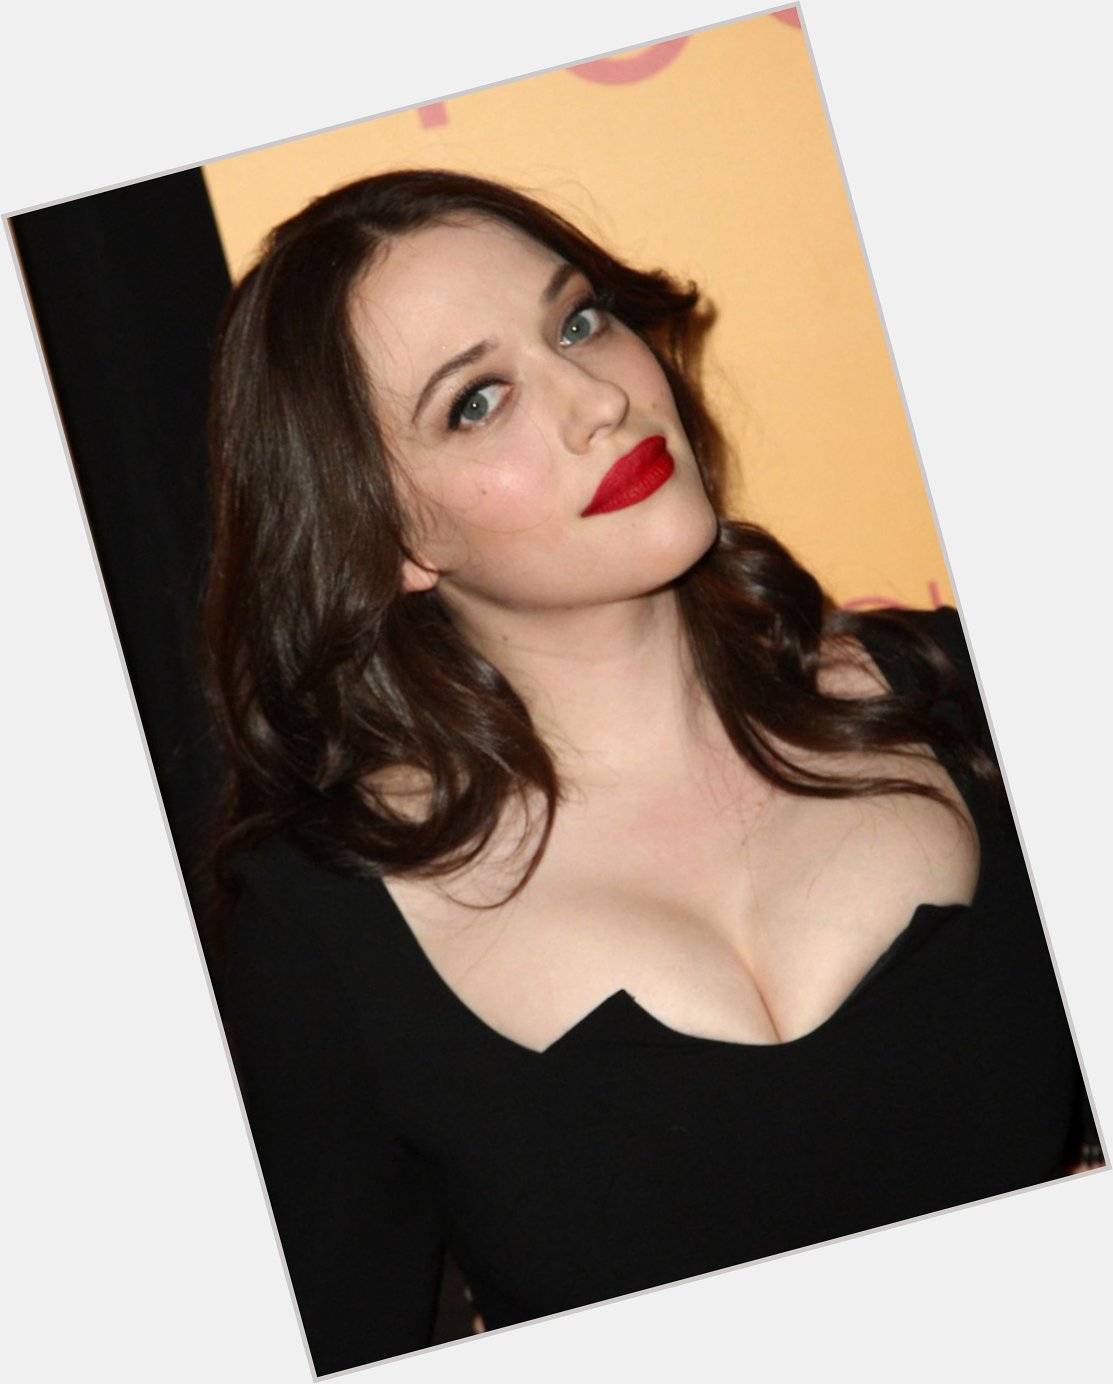 A very happy birthday to the voluptuous Kat Dennings 